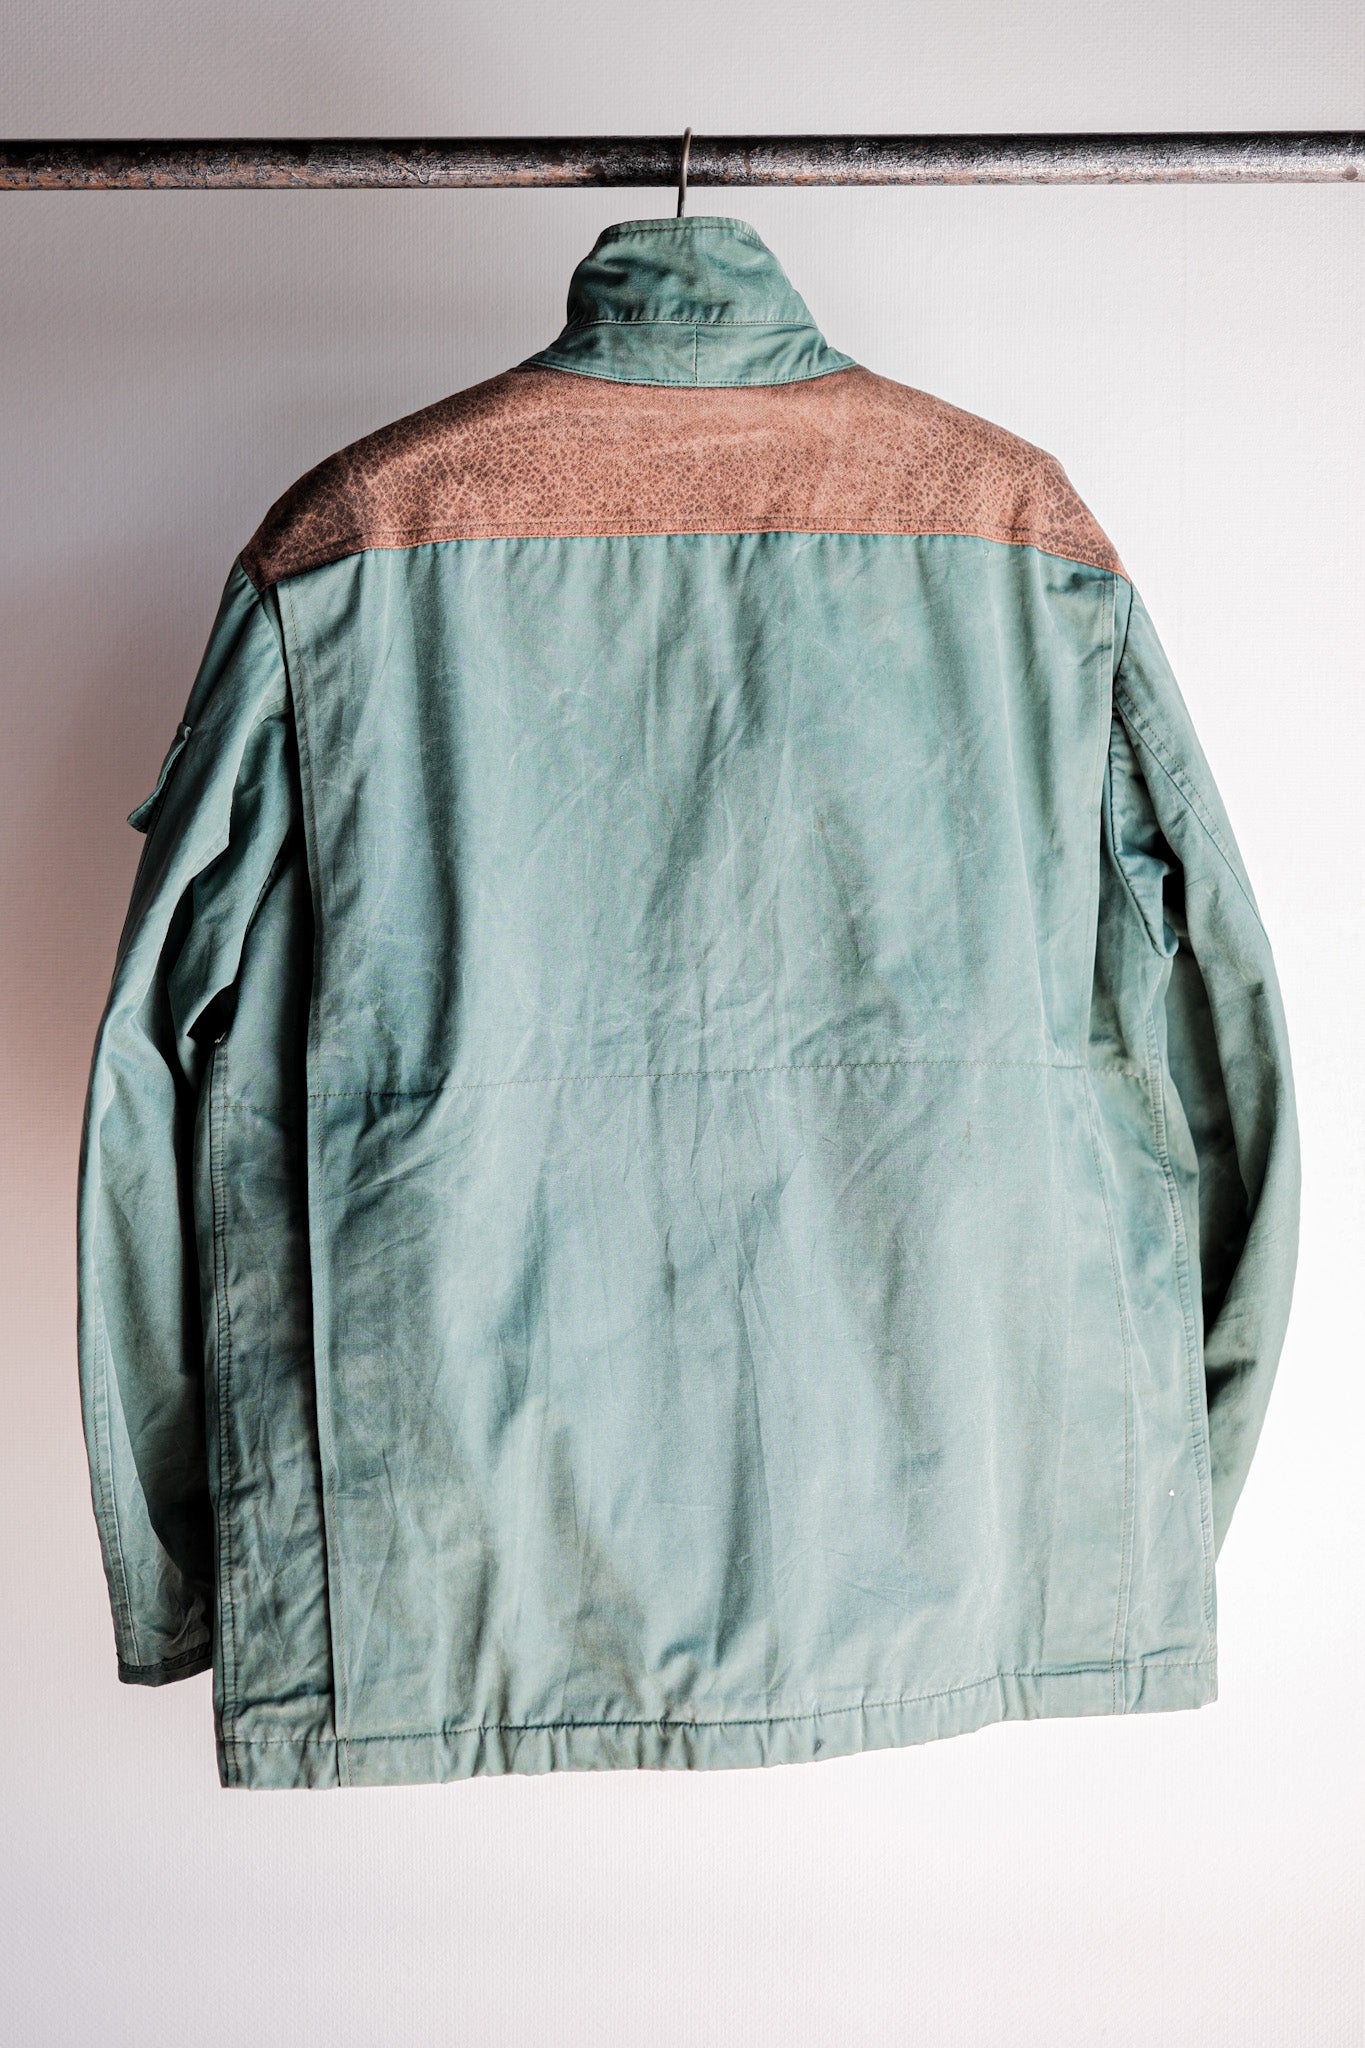 [~ 60's] French Vintage Hunting & Fishing Cotton Jacket Size.52 "L'ESQUIMAU"